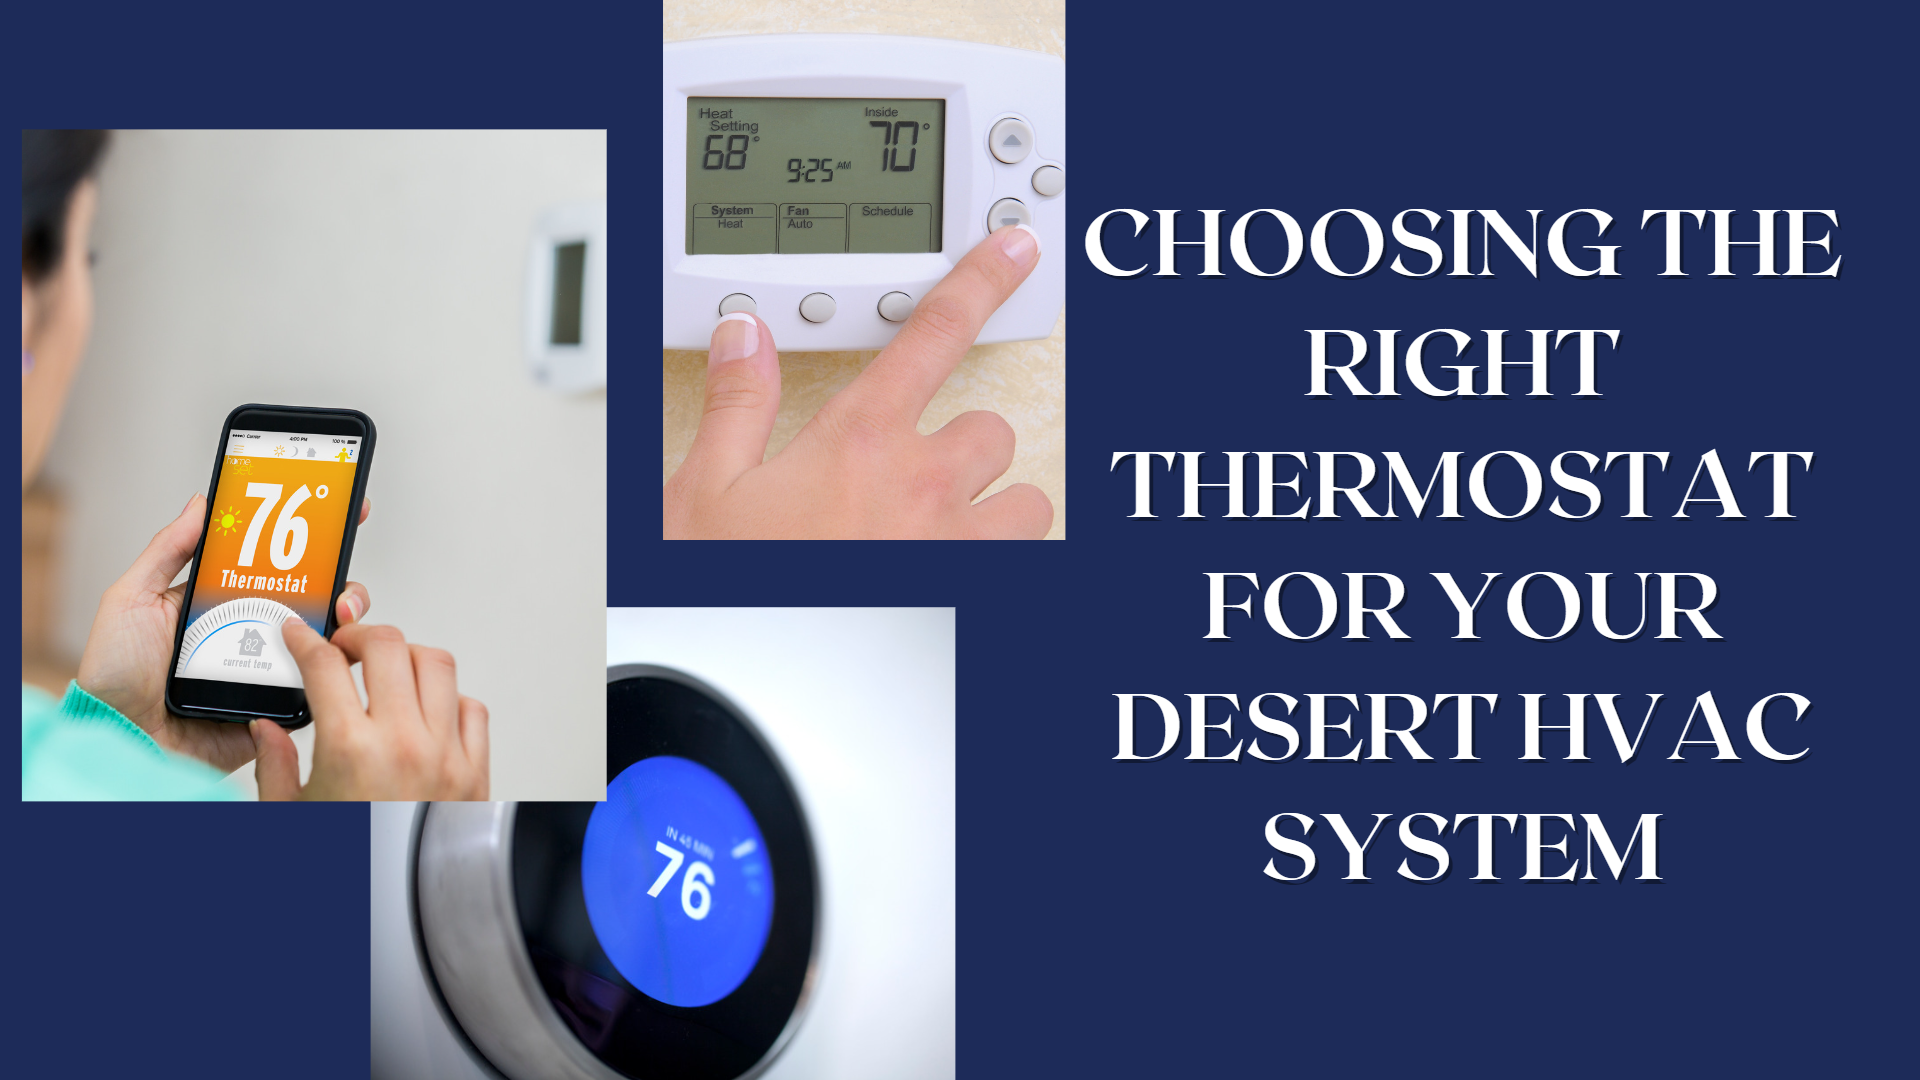 Choosing the Right Thermostat for Your Desert HVAC System